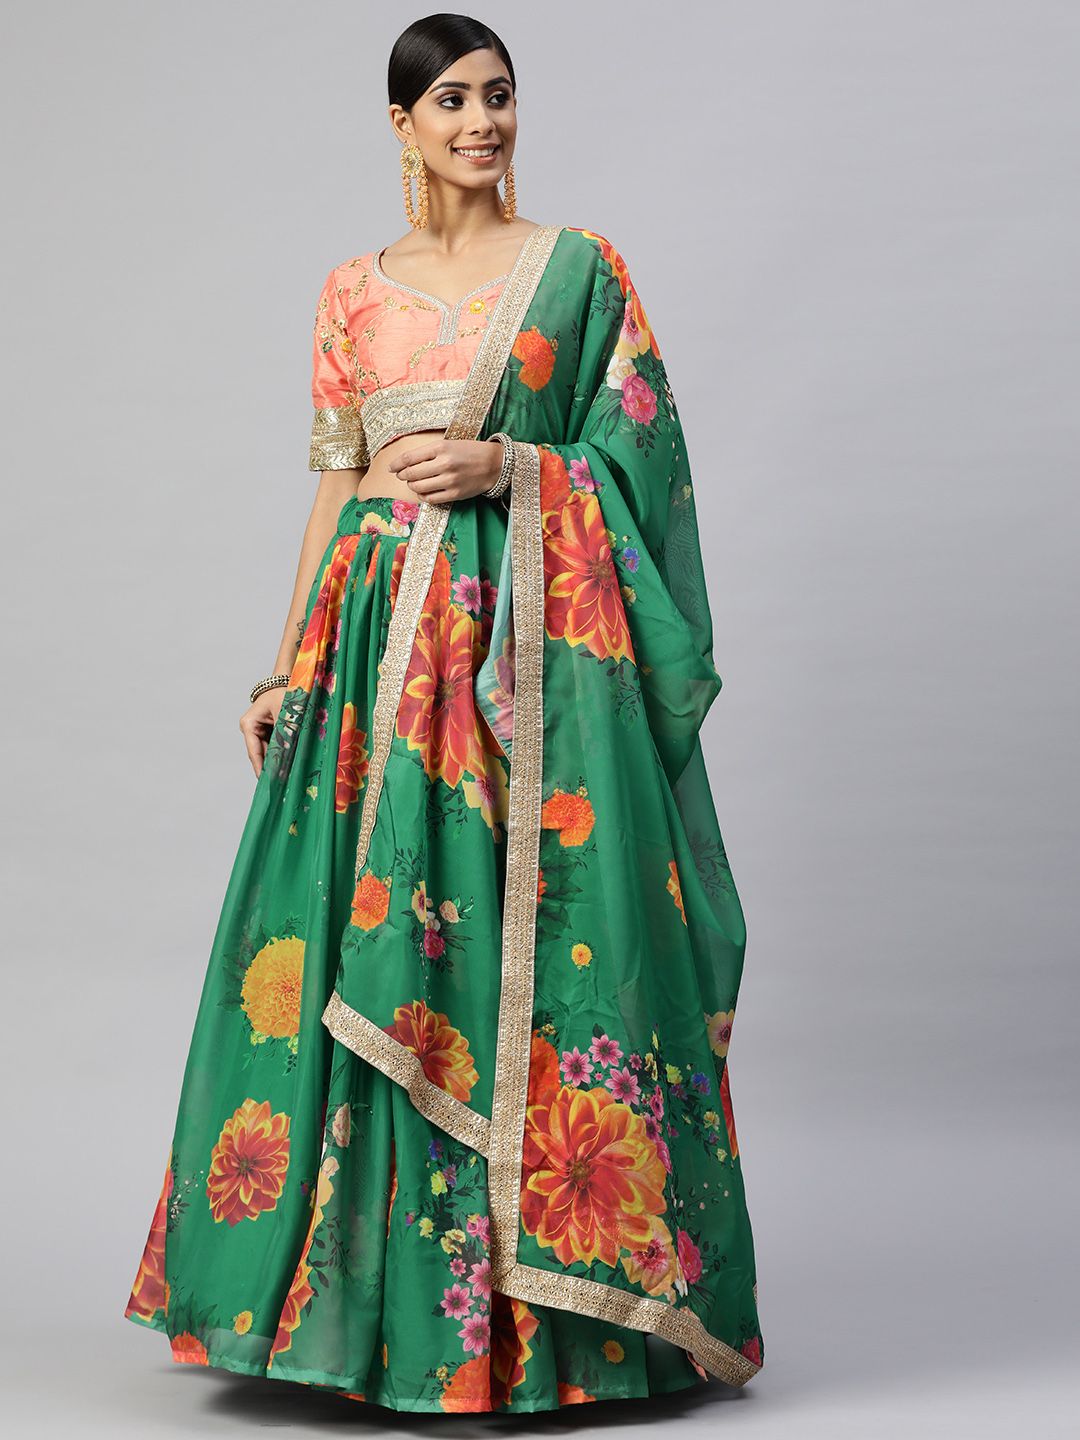 Readiprint Fashions Green & Peach-Coloured Embroidered Sequinned Semi-Stitched Lehenga Set Price in India